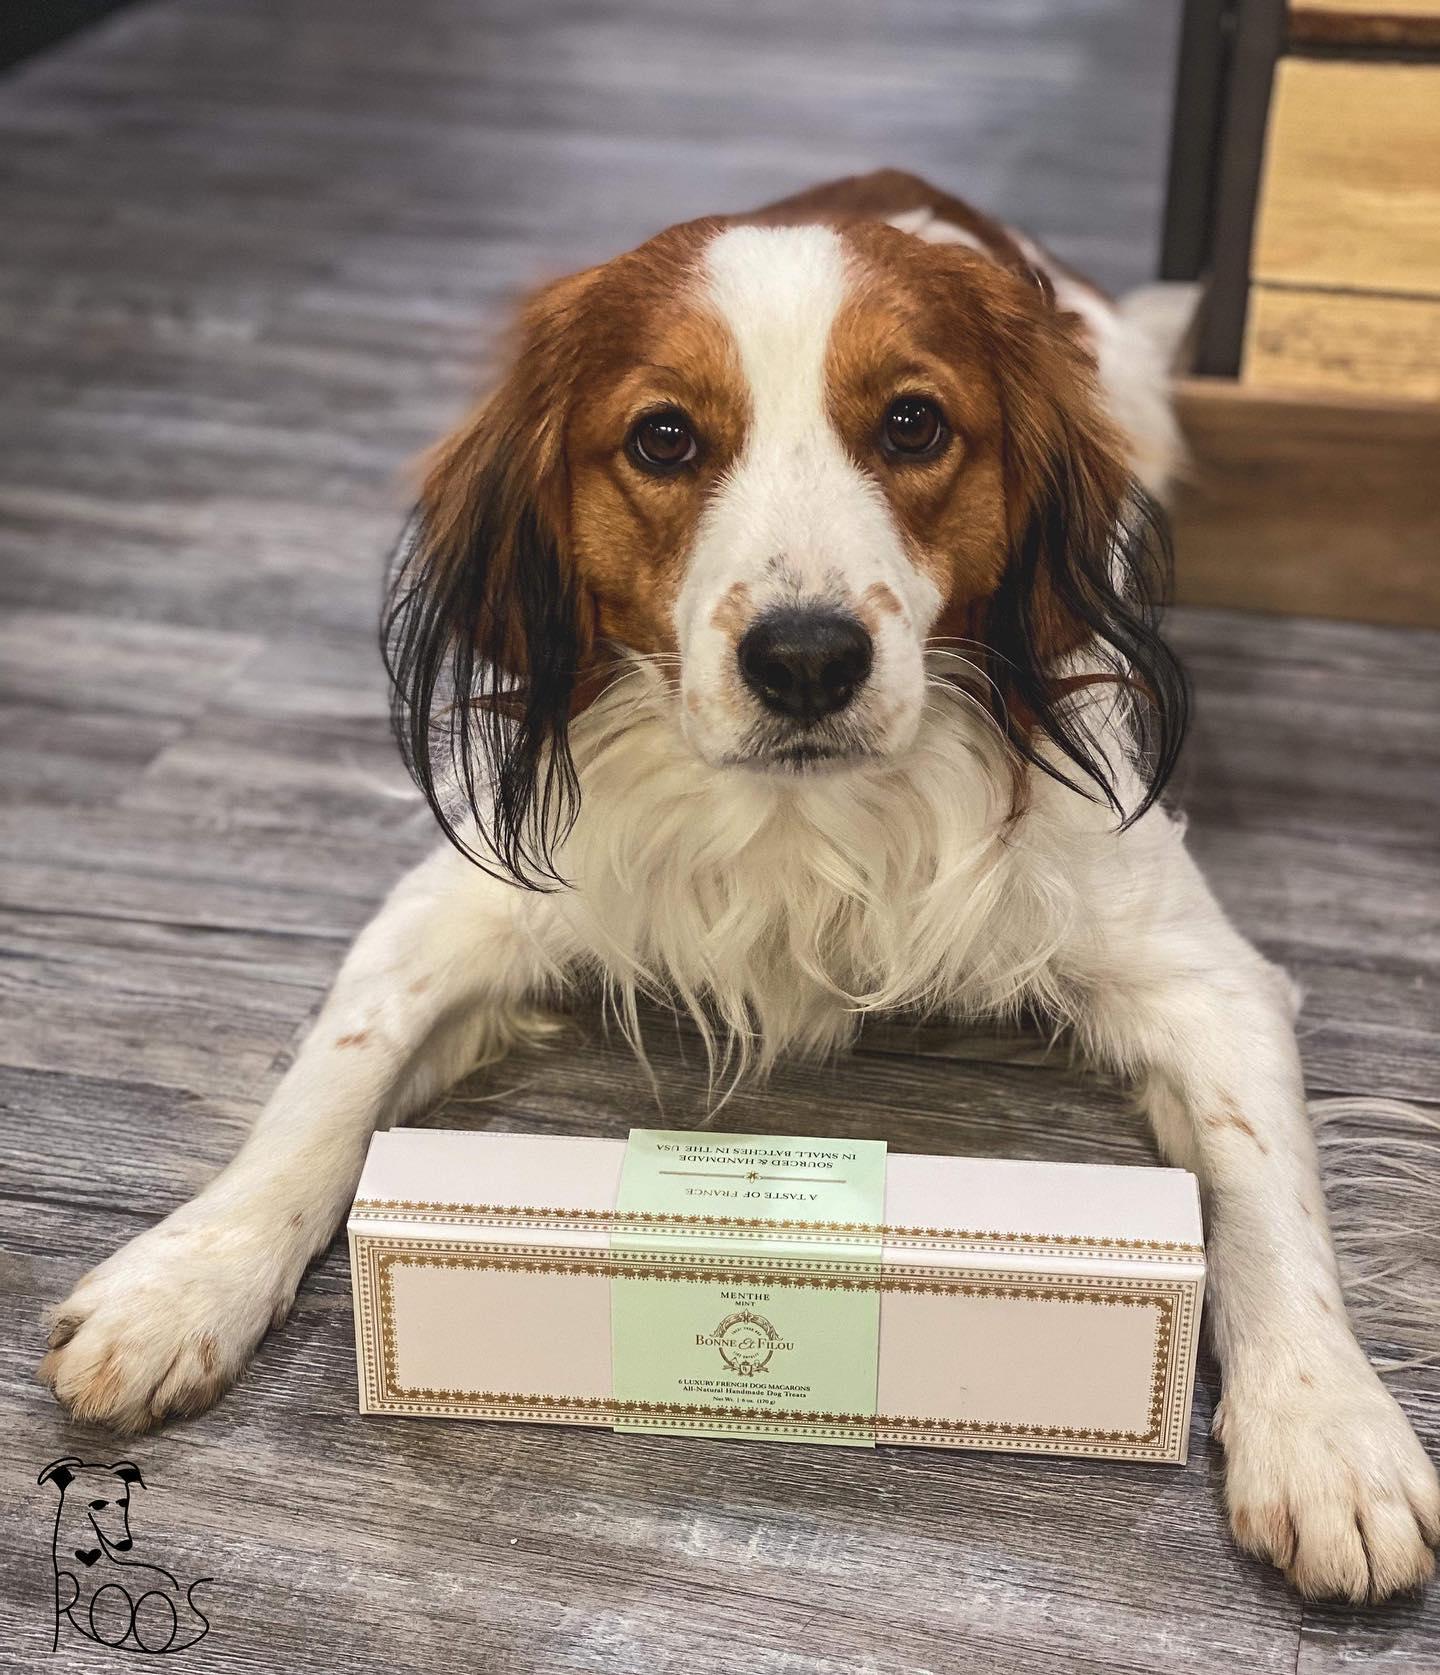 Does your pet need nutritional advice consultations? Roo's Holistic Pet Supplies provide access to organic, premium,and raw diets, and a wide range of holistic supplements for companion animals.